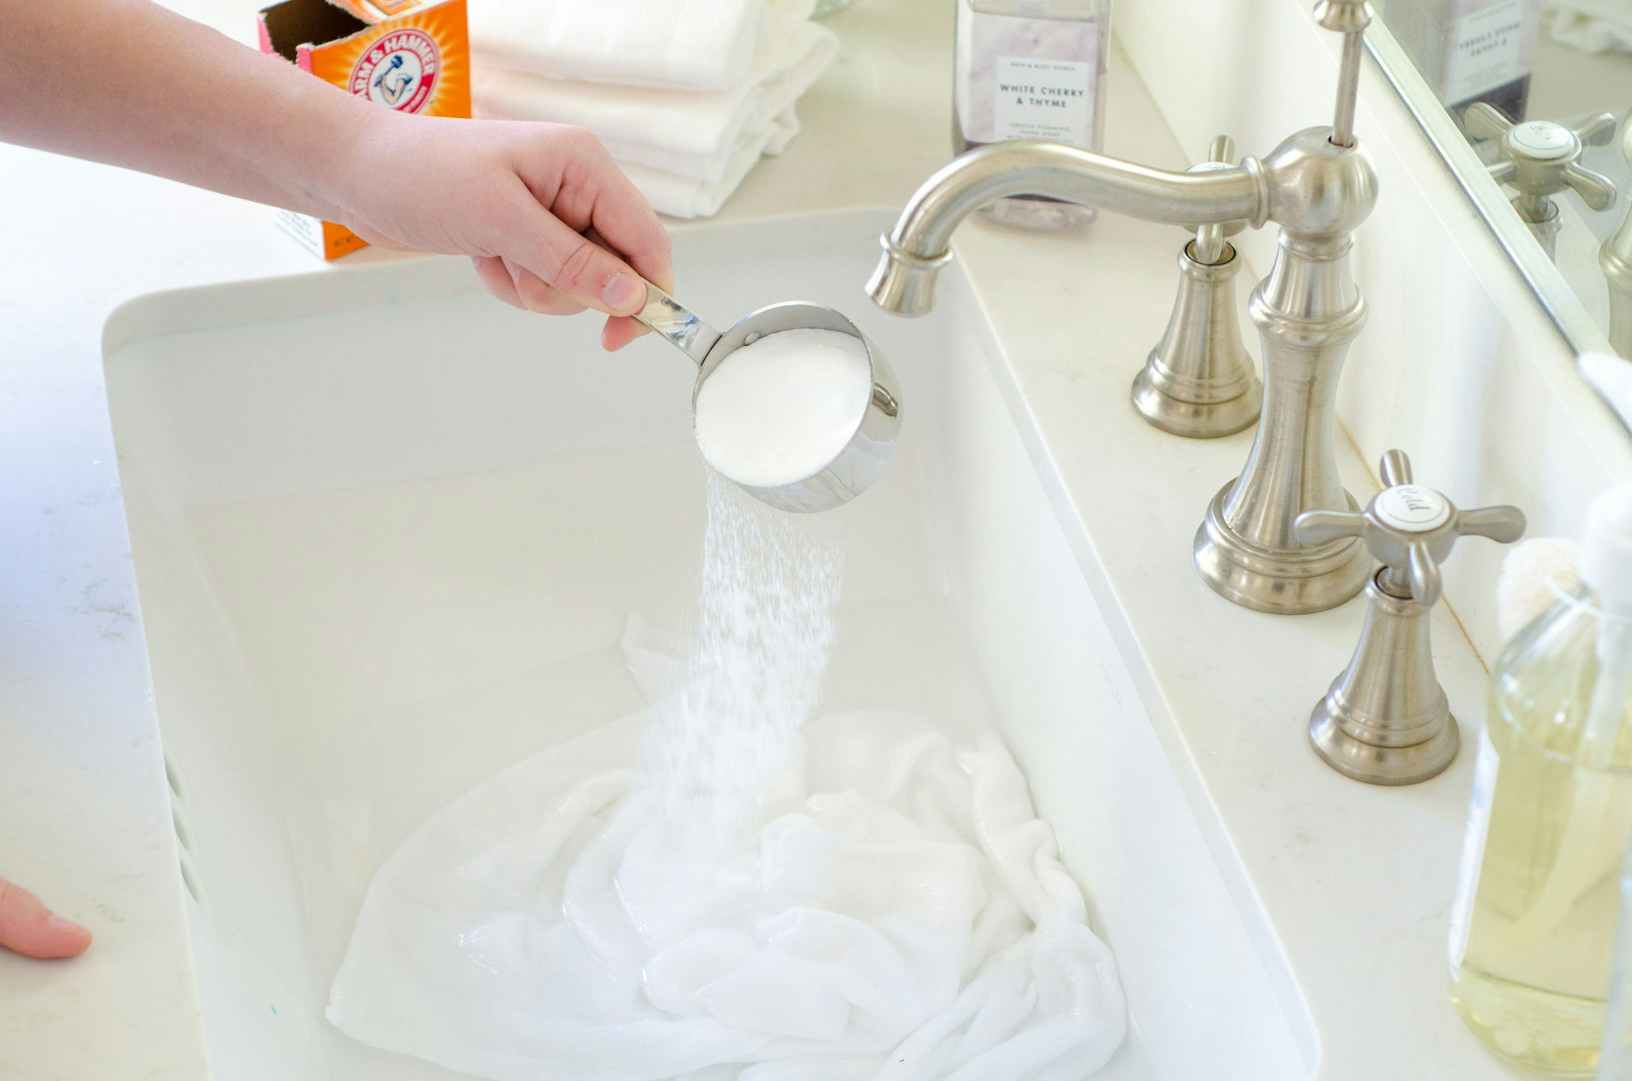 Clean cloth diapers by dissolving half a cup of baking soda in 8 cups of water.